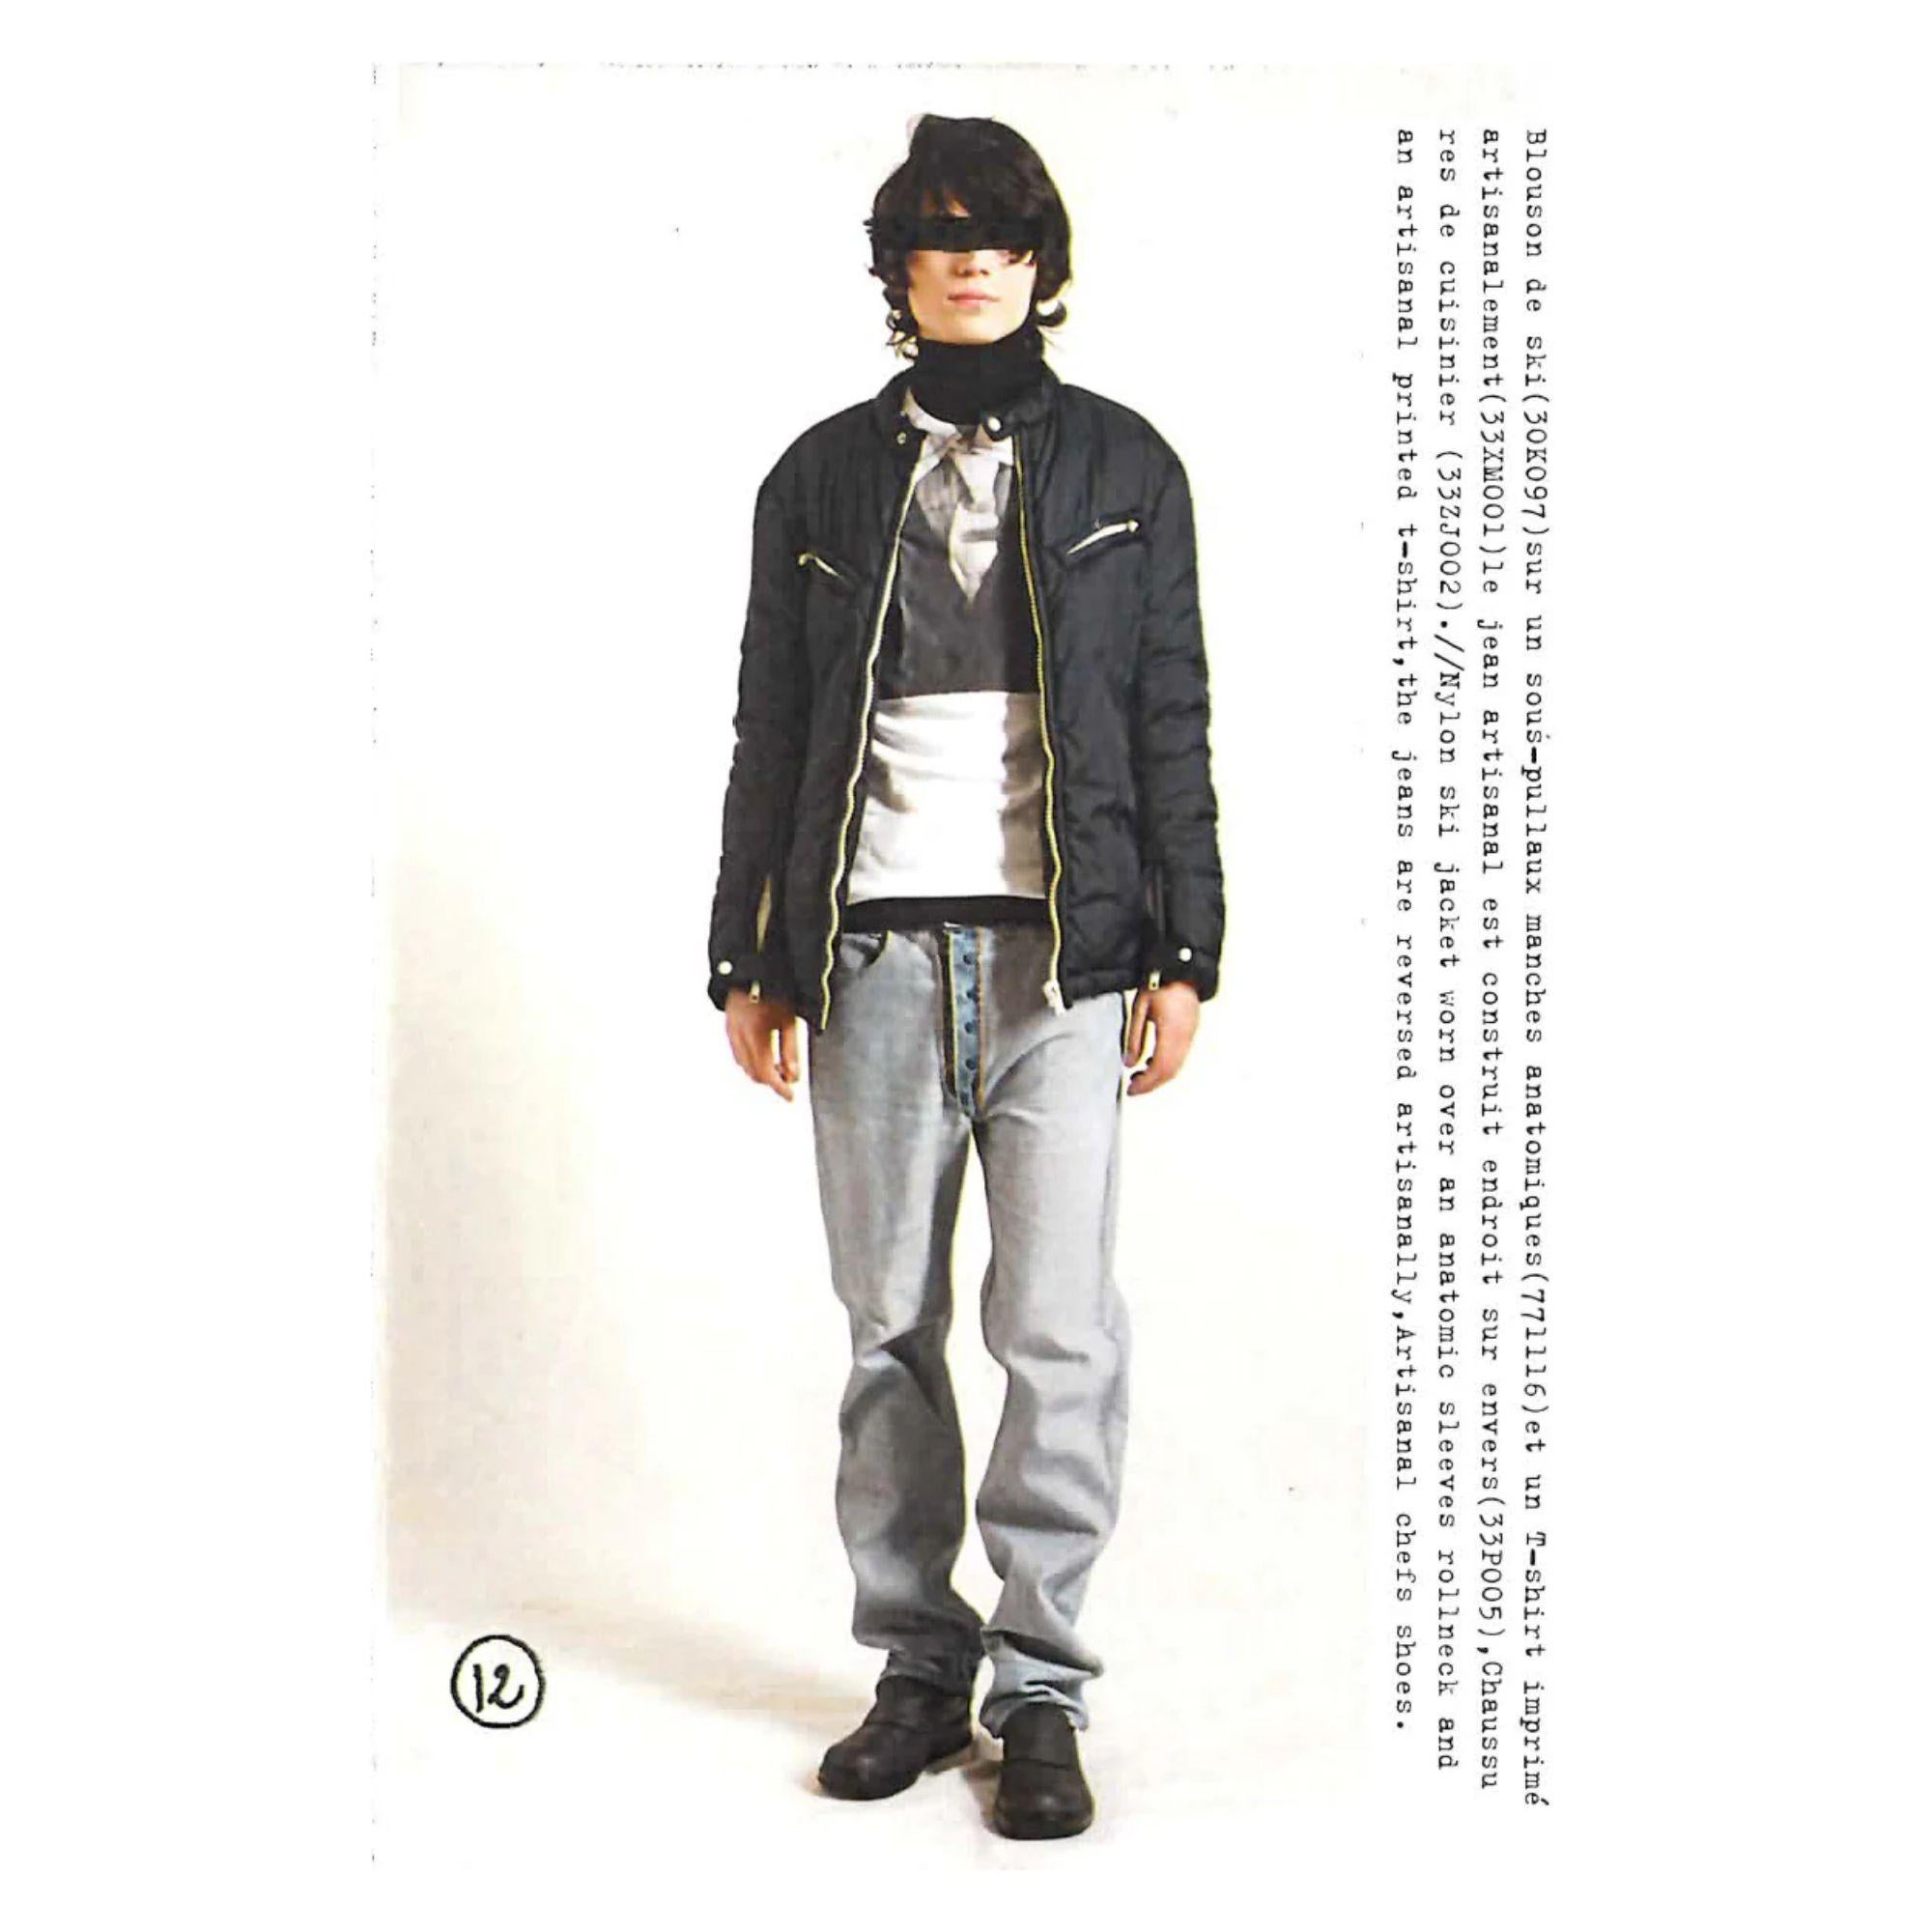 A/W 2003 Maison Martin Margiela artisanal jeans with inverted button-up front detail. These jeans were originally vintage denim Levi's, turned inside-out for a reverse variation. High-rise jeans with snap closures at crotch and tan contrast